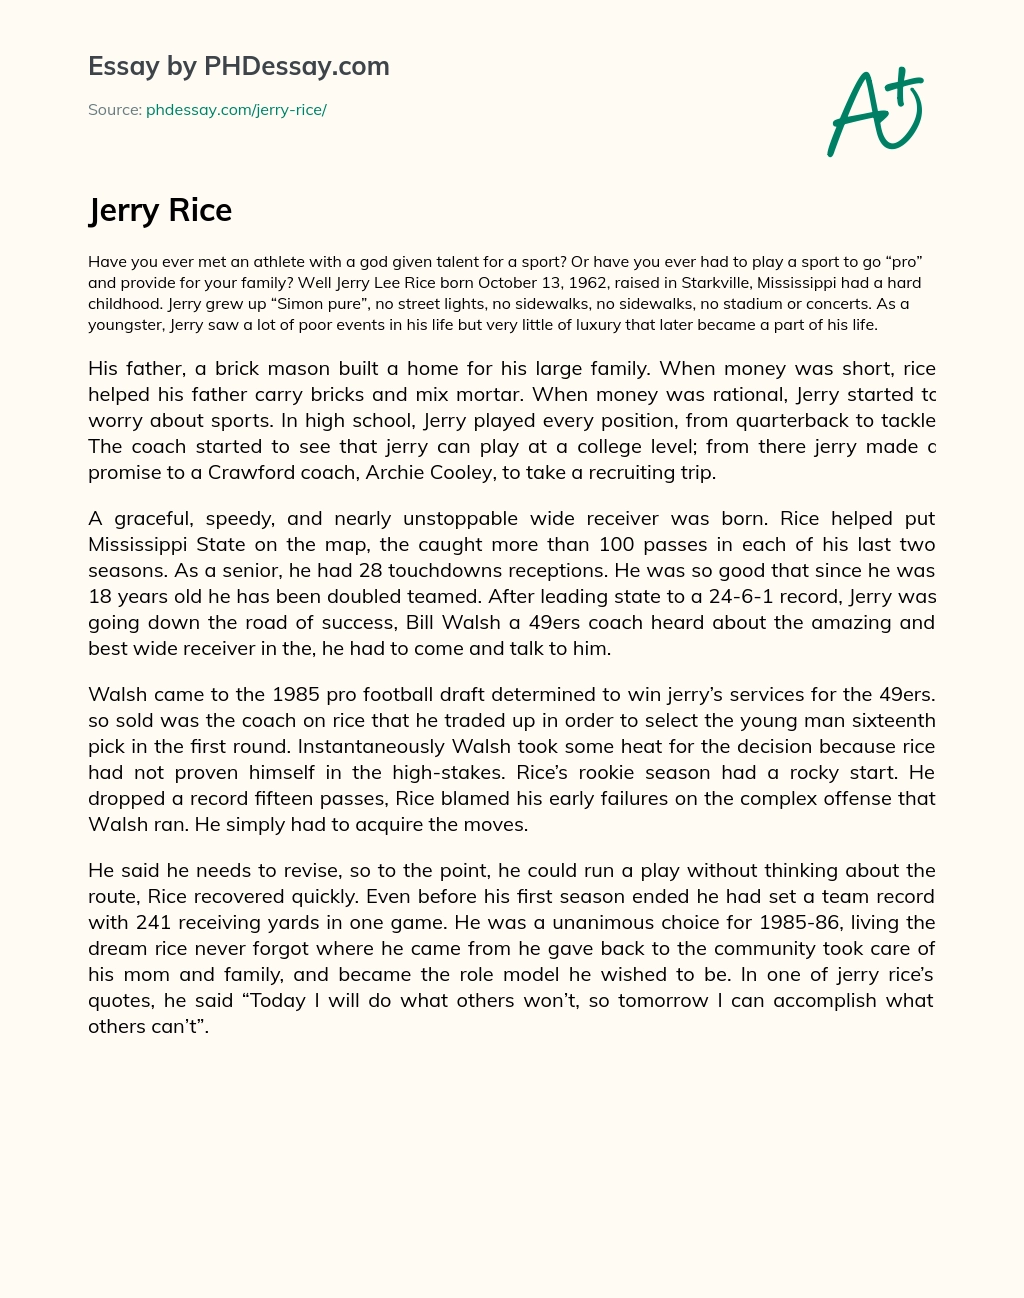 Jerry Rice’s Journey from Poverty to Football Stardom essay